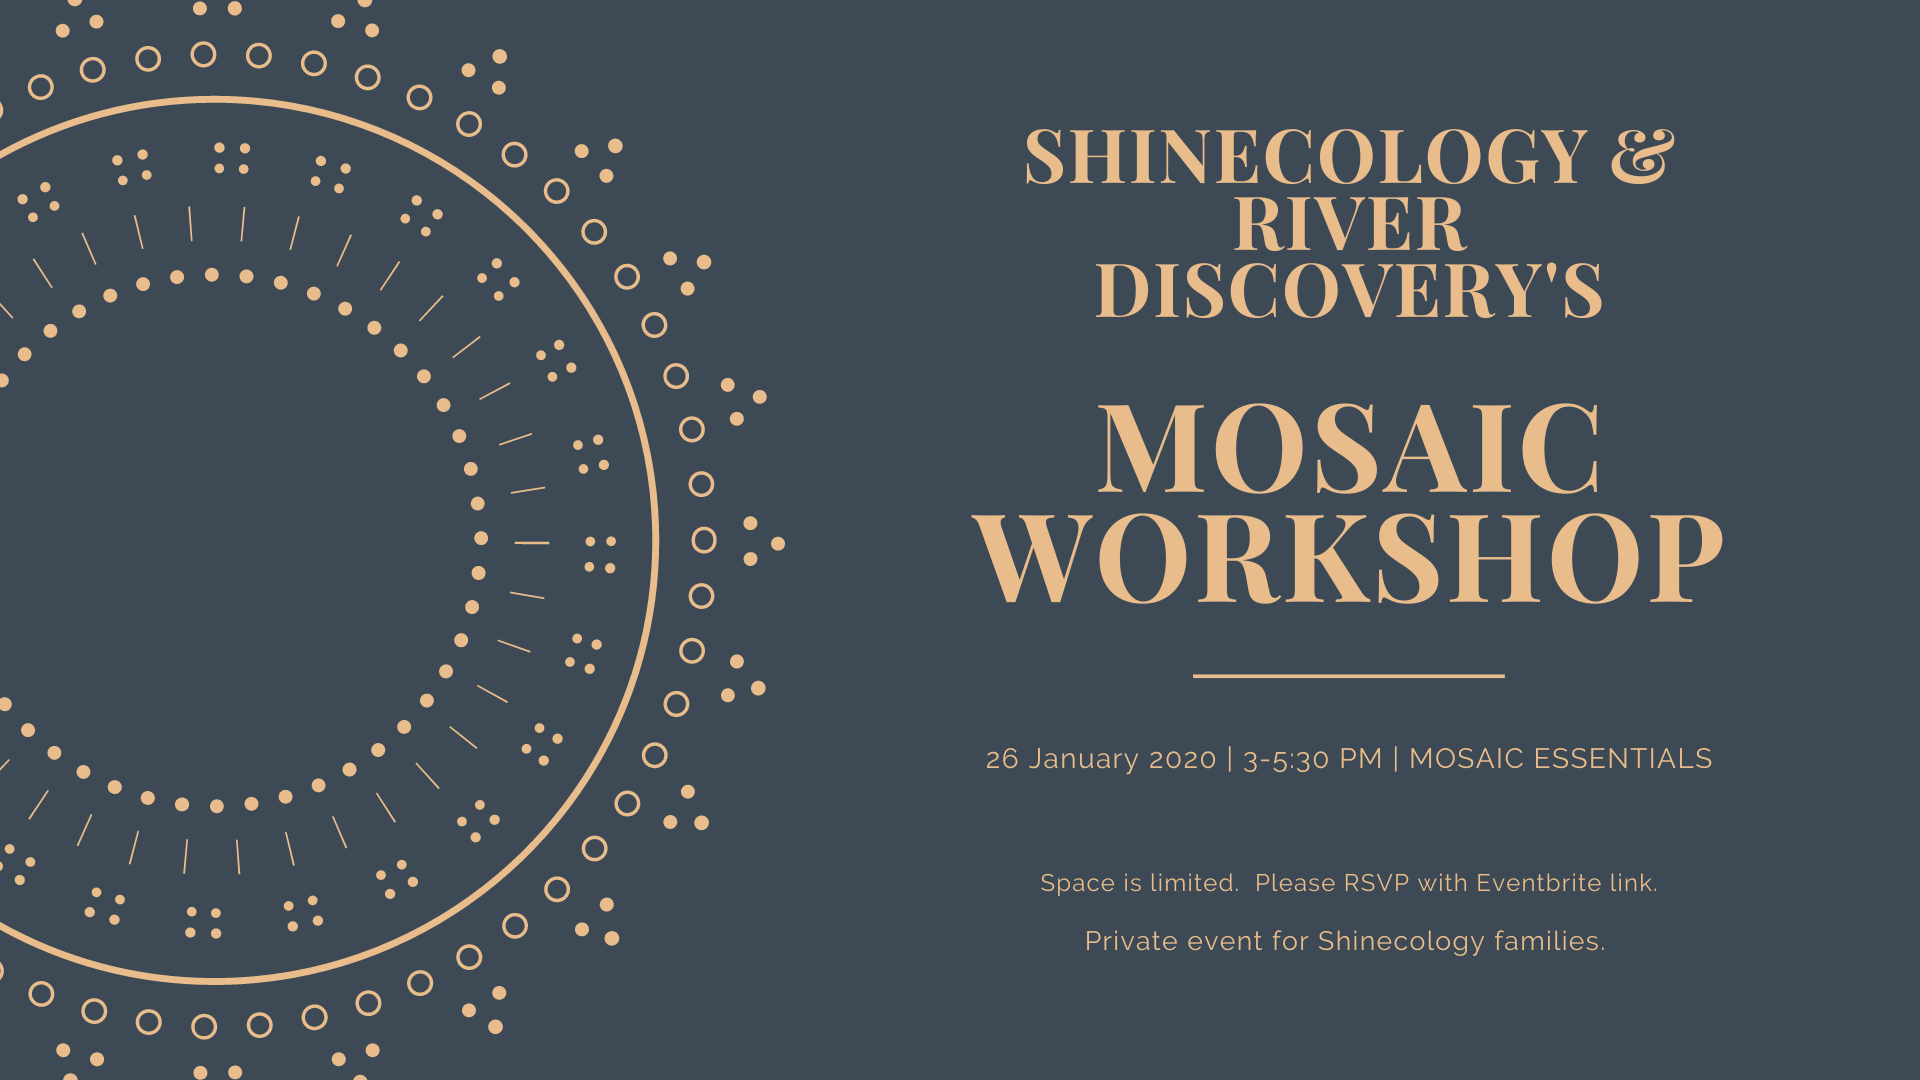 Shinecology & River Discovery's Mosaic Workshop